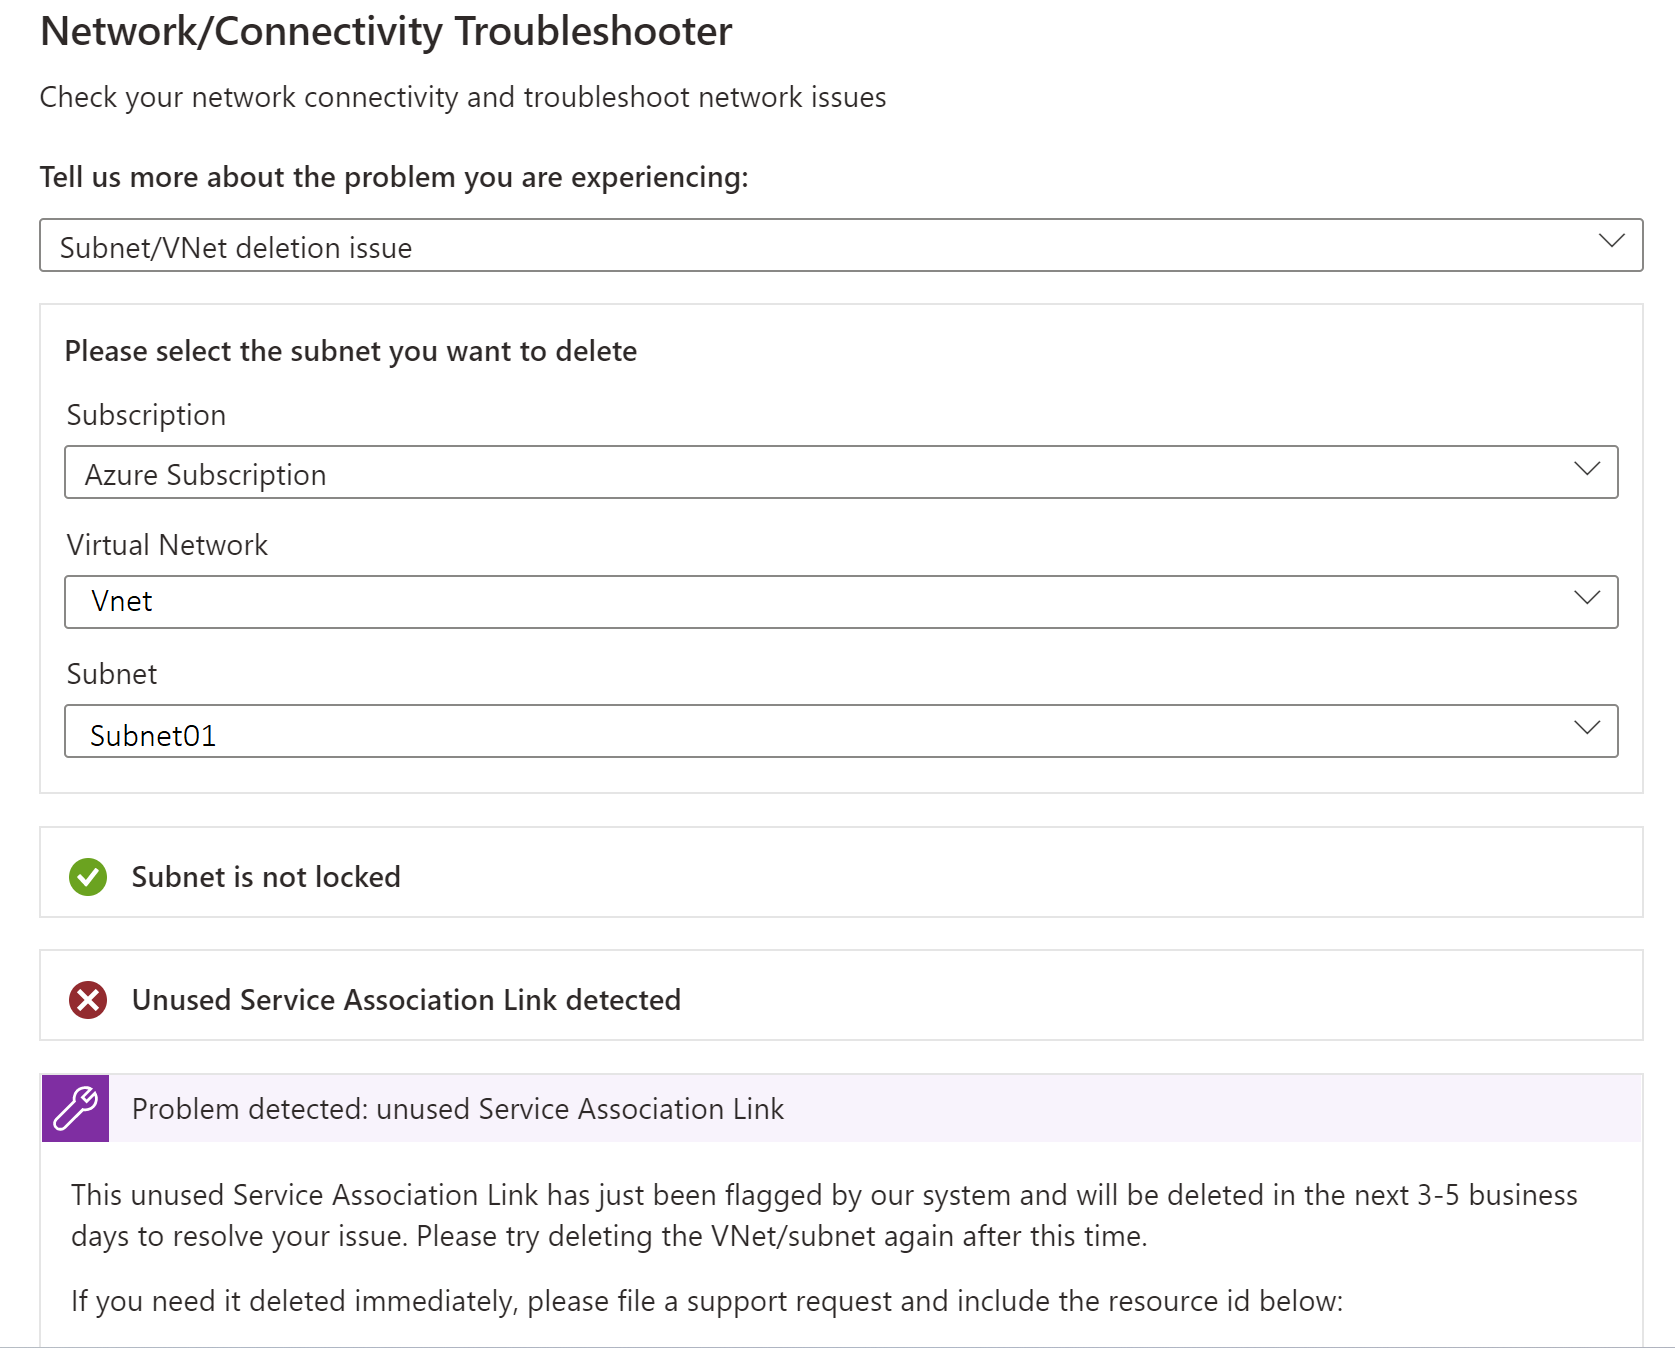 Screenshot that shows how to run troubleshooter for subnet or virtual network deletion issues.